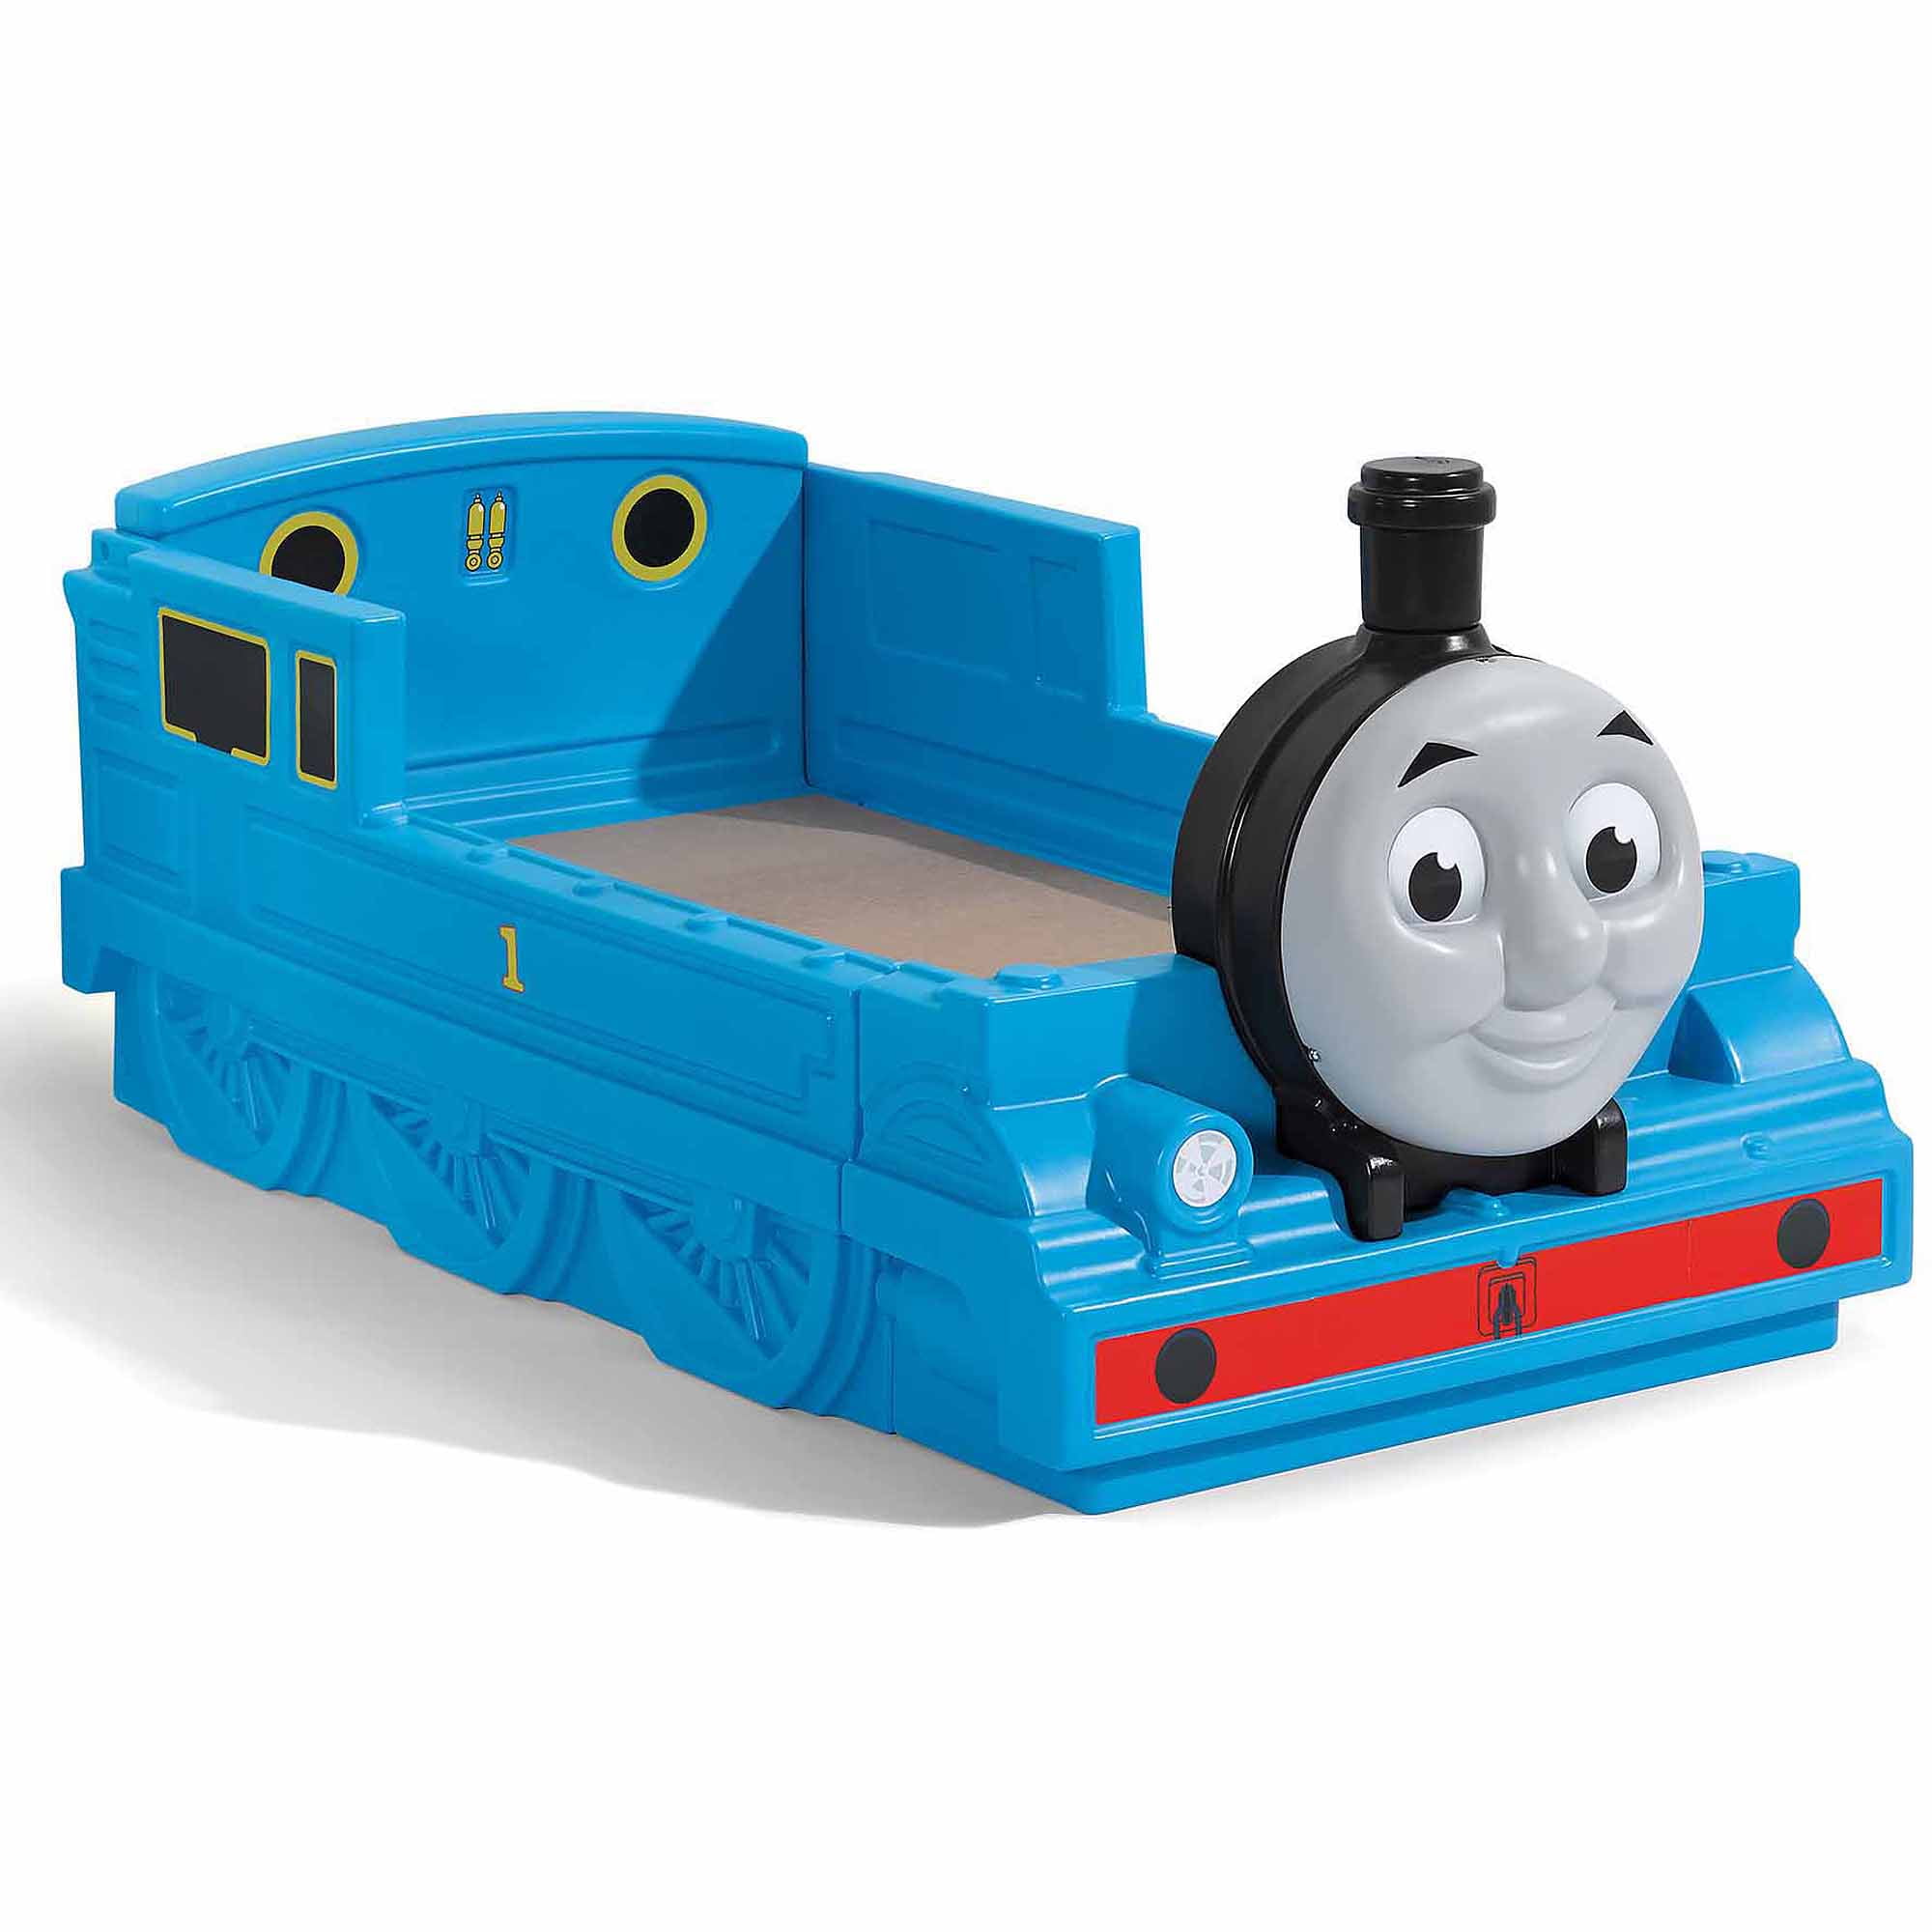 The Tank Engine Plastic Toddler Bed, Thomas The Train Engine Loft Bed